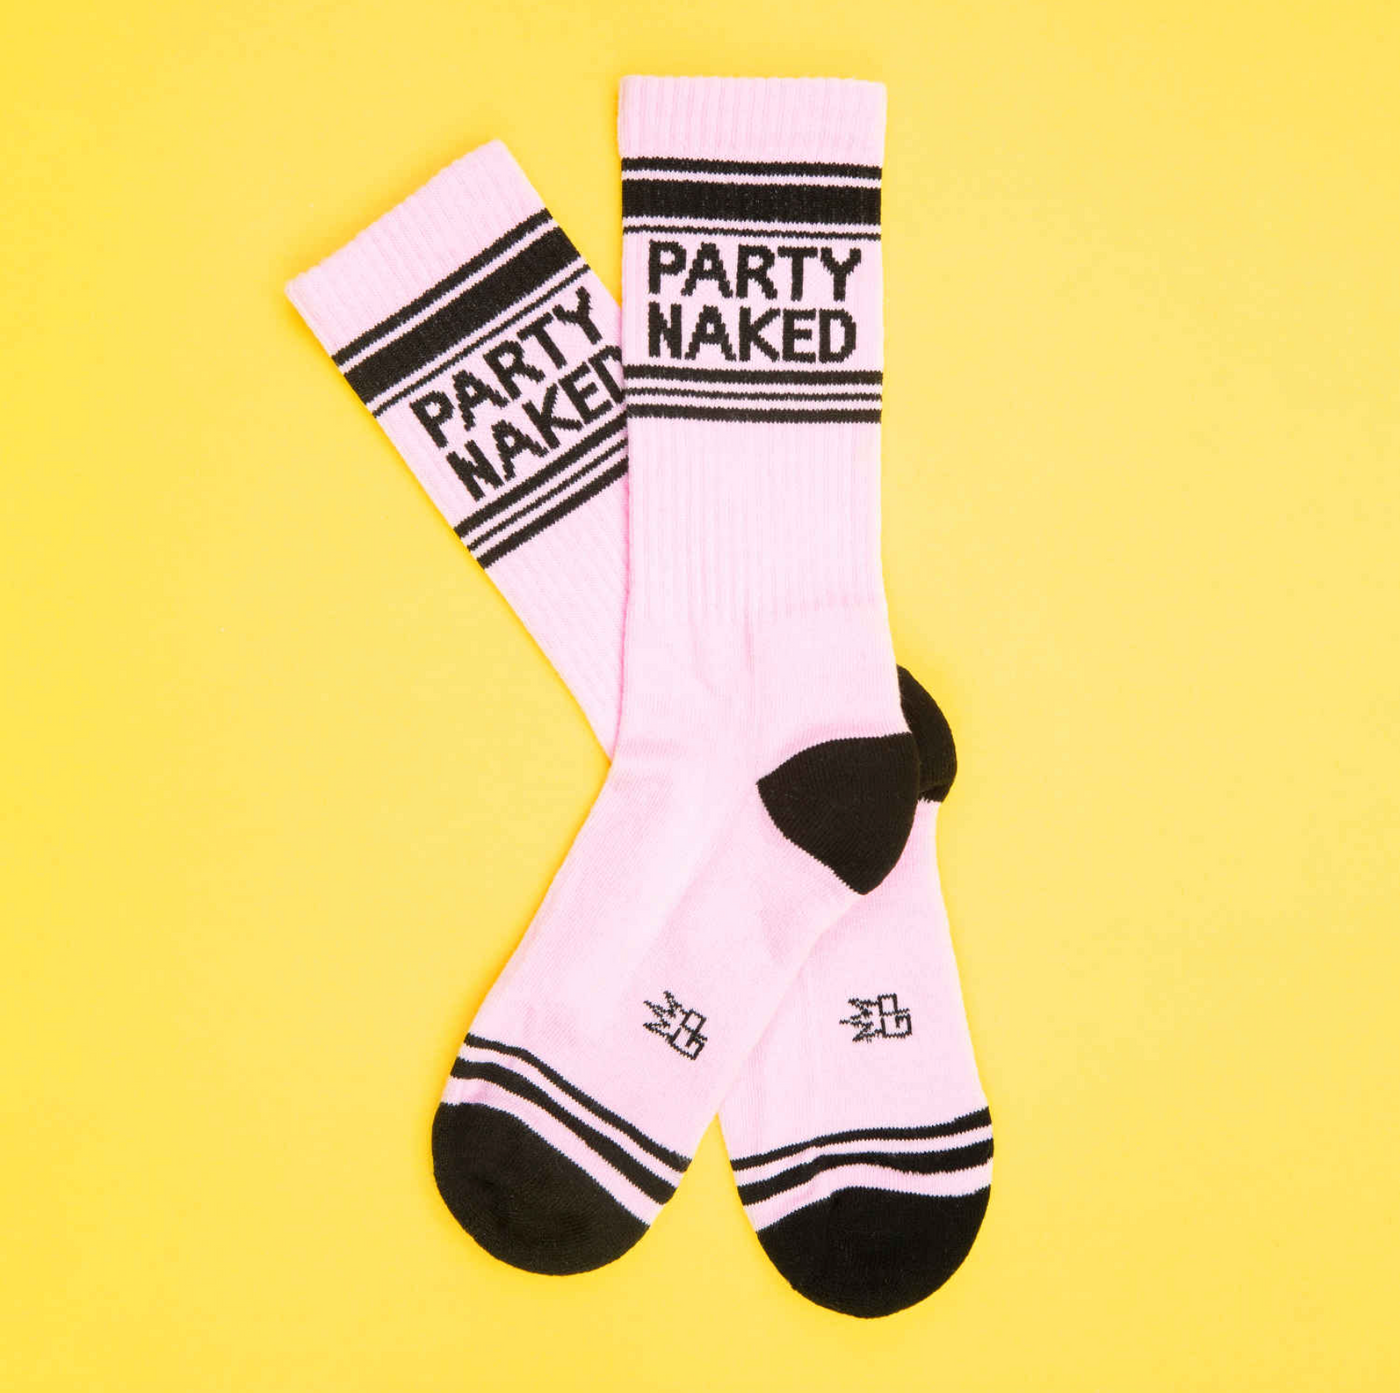 PARTY NAKED gym socks